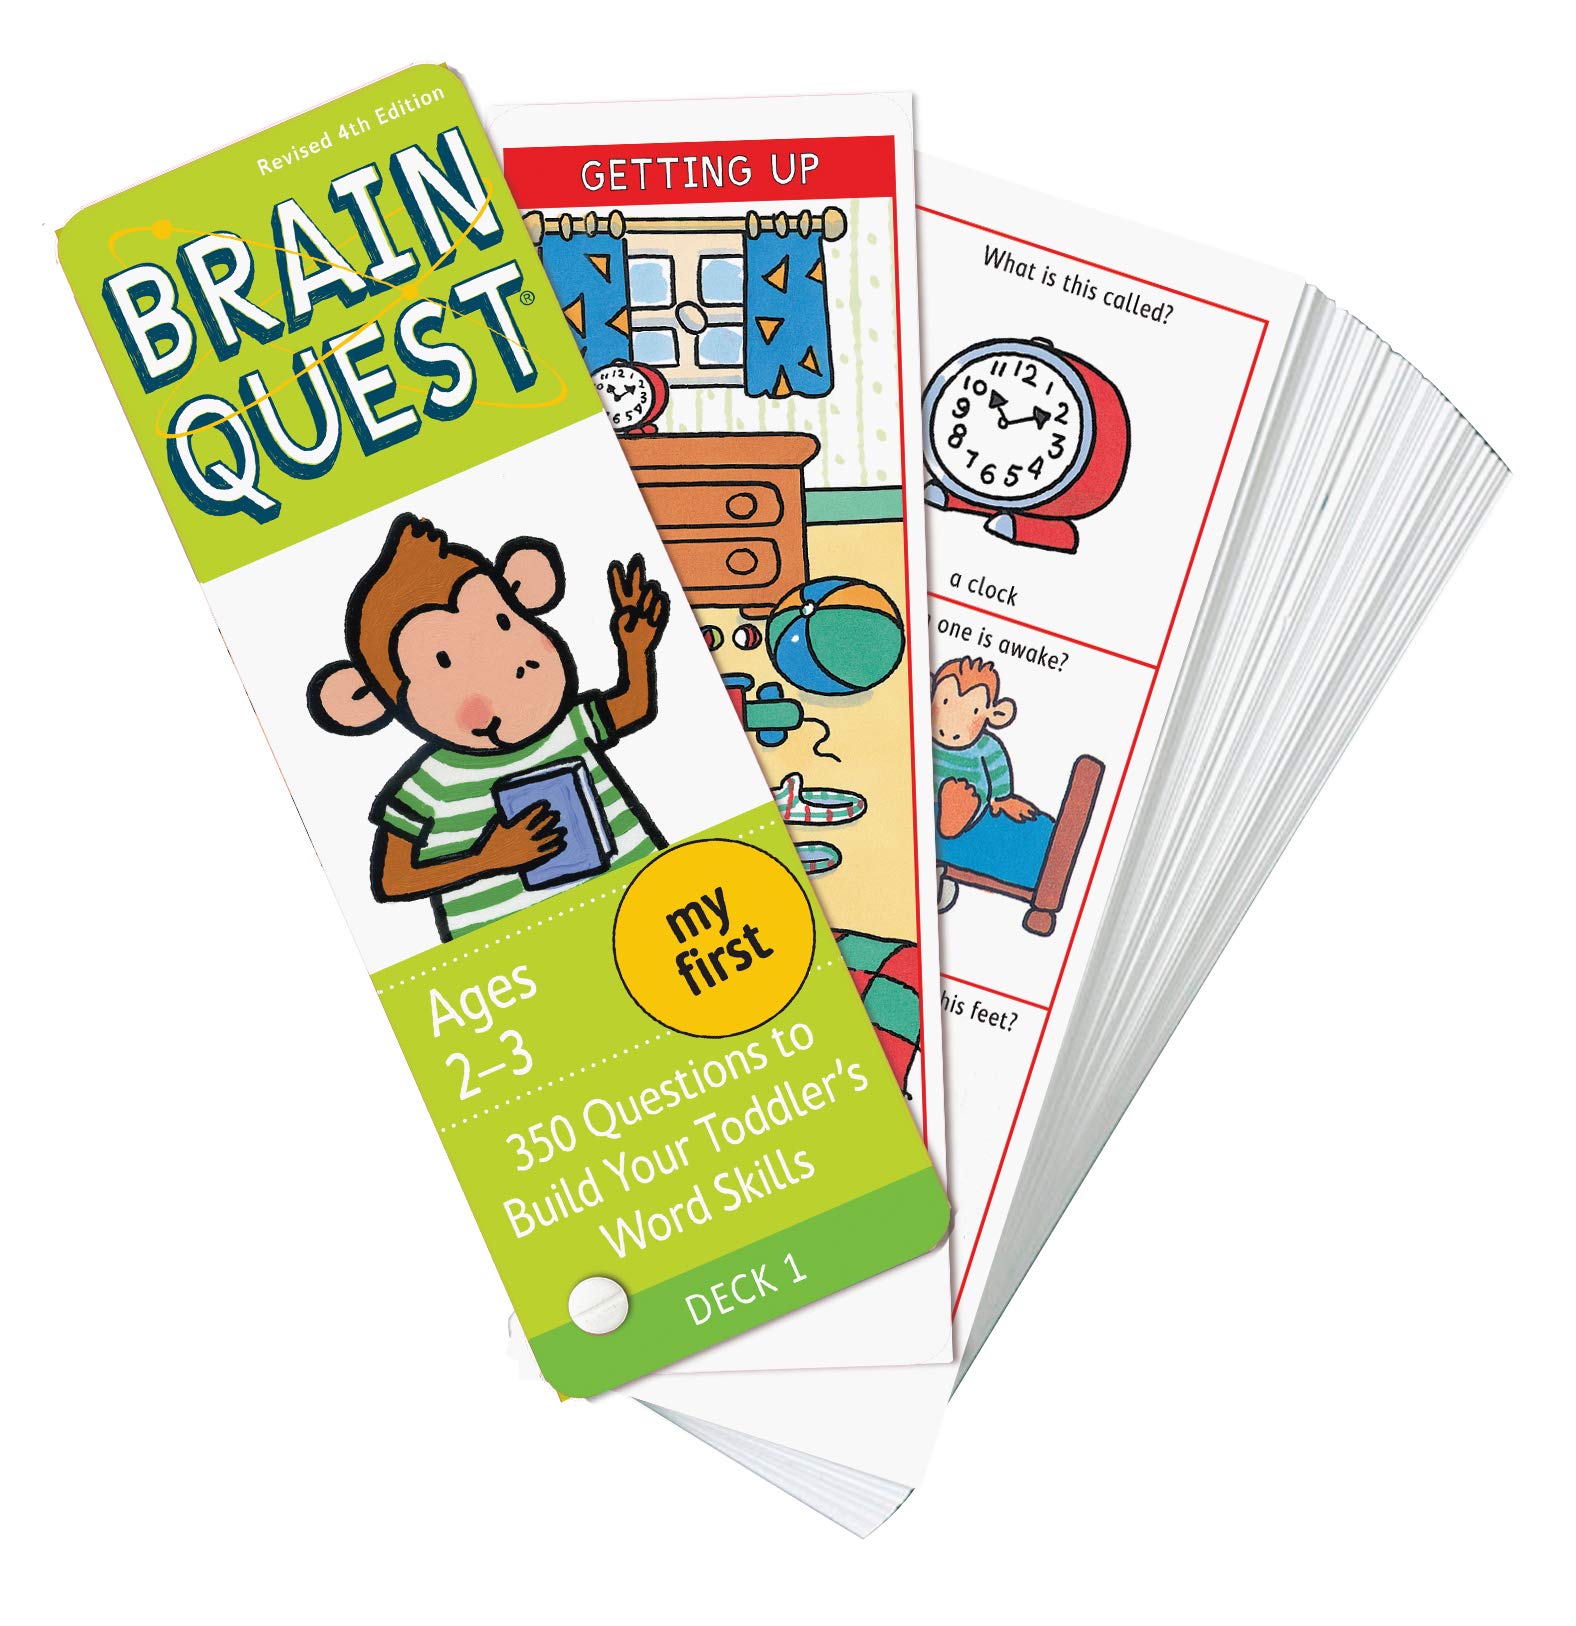 My First Brain Quest, revised 4th edition: 350 Questions and Answers to Build Your Toddlers Word Skills - Workman Publishing - The English Bookshop